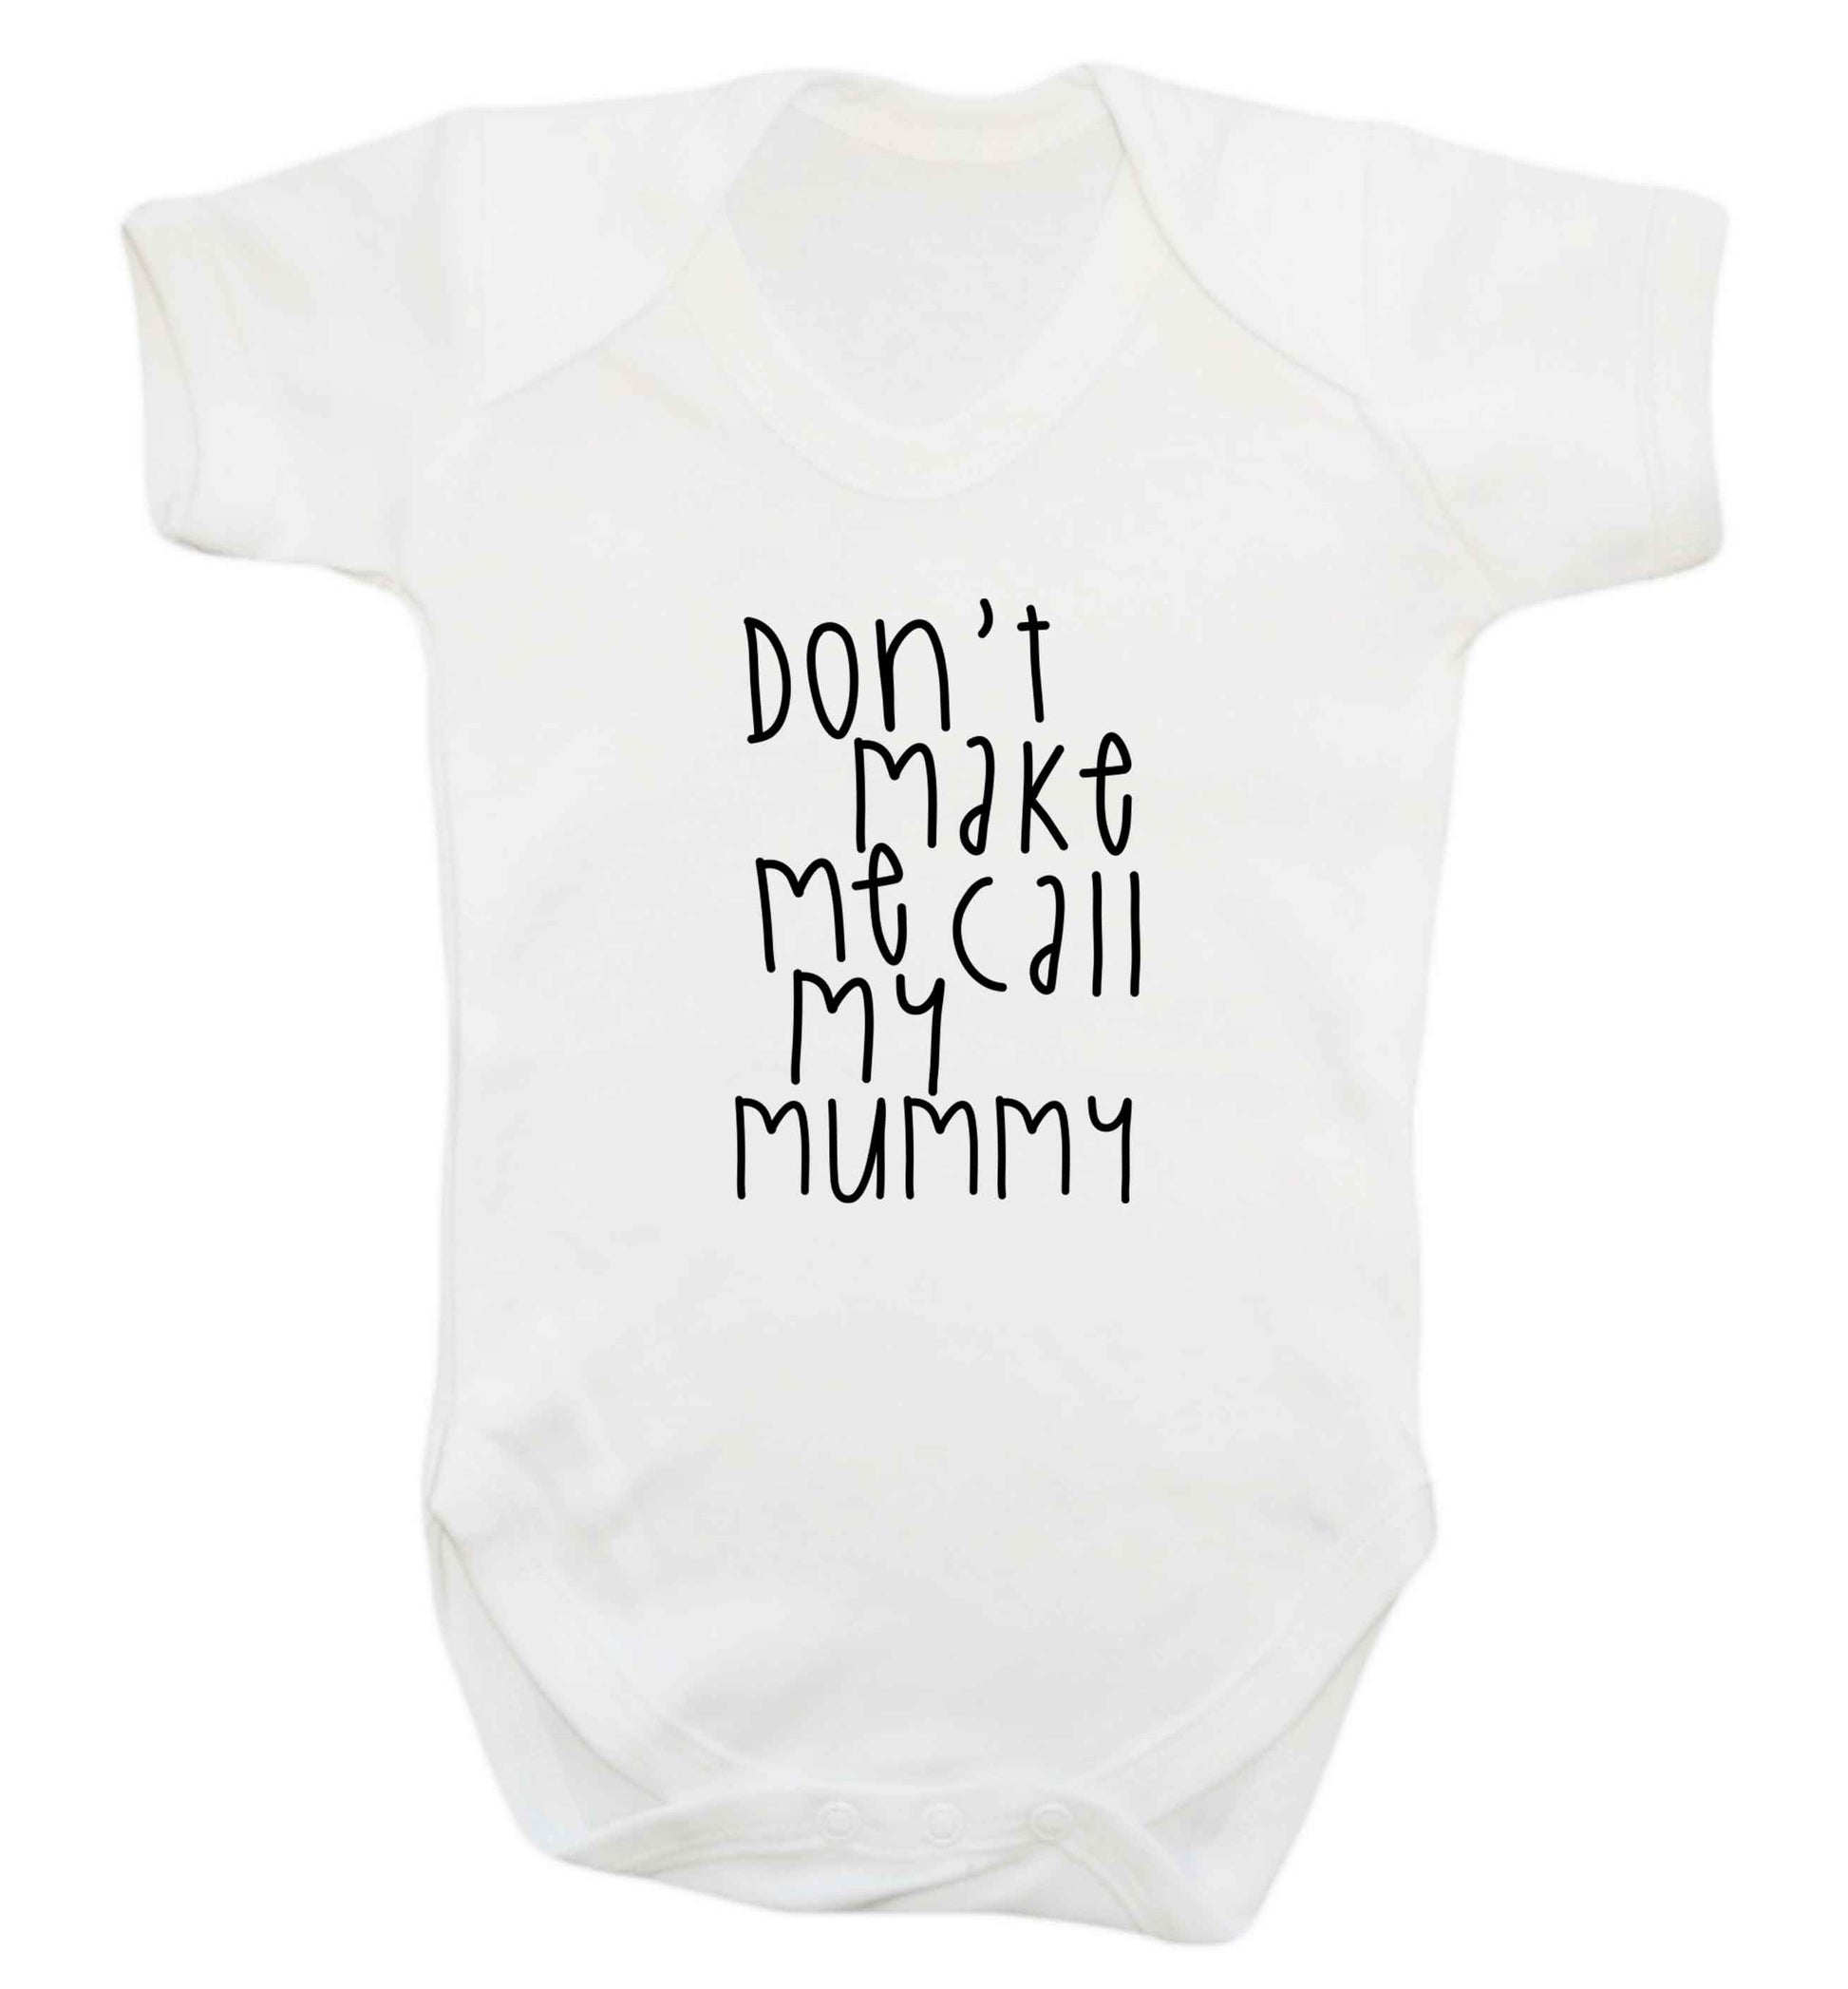 Don't make me call my mummy baby vest white 18-24 months